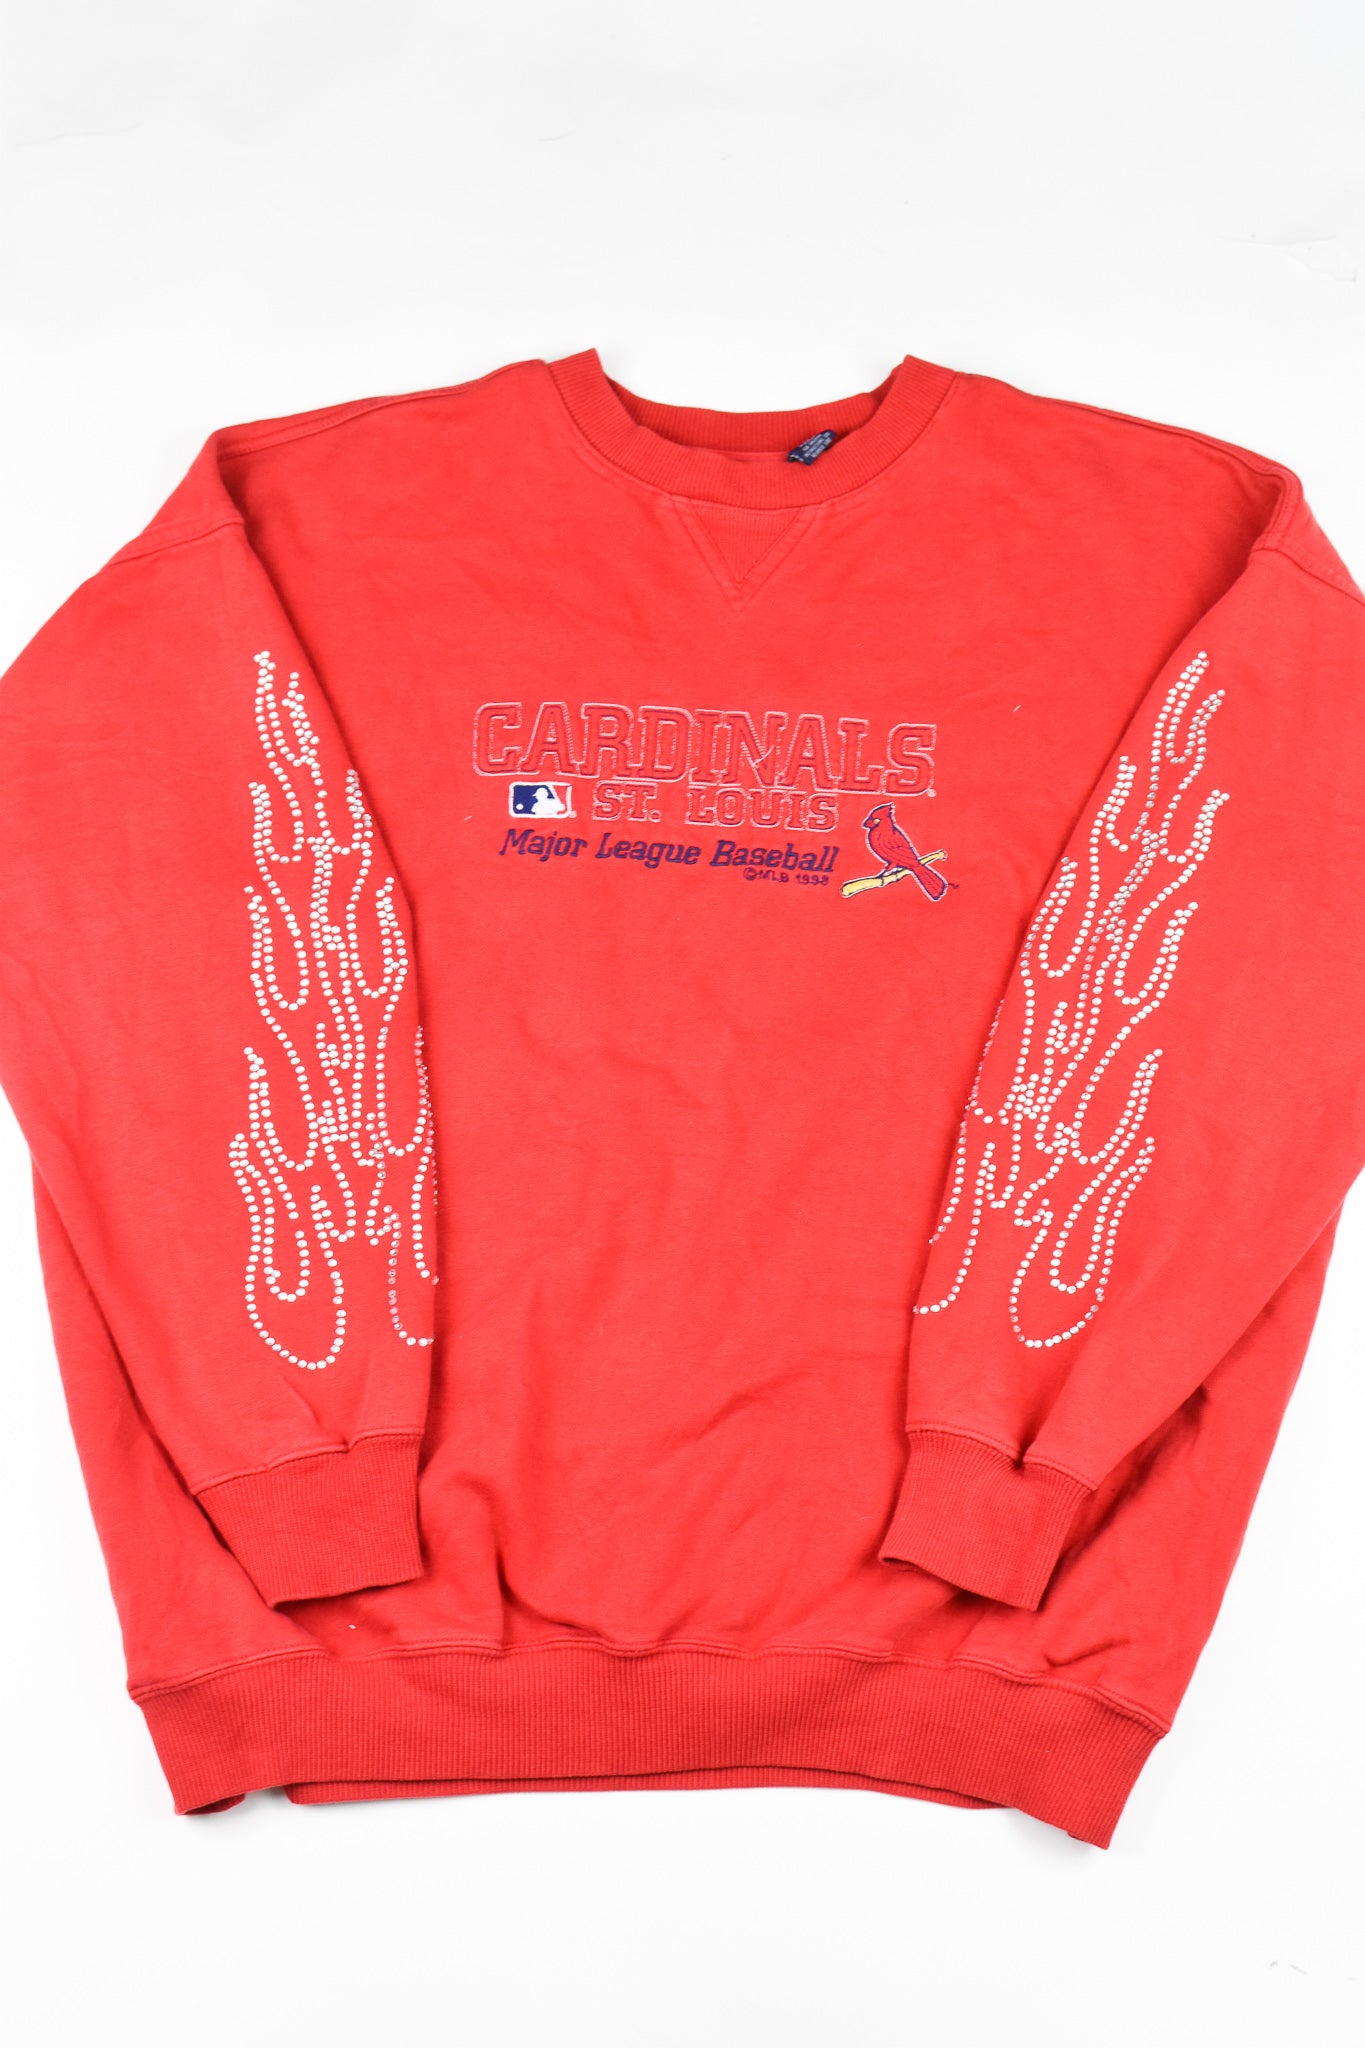 Upcycled Vintage Cardinals Flame Sweatshirt - Tonguetied Apparel